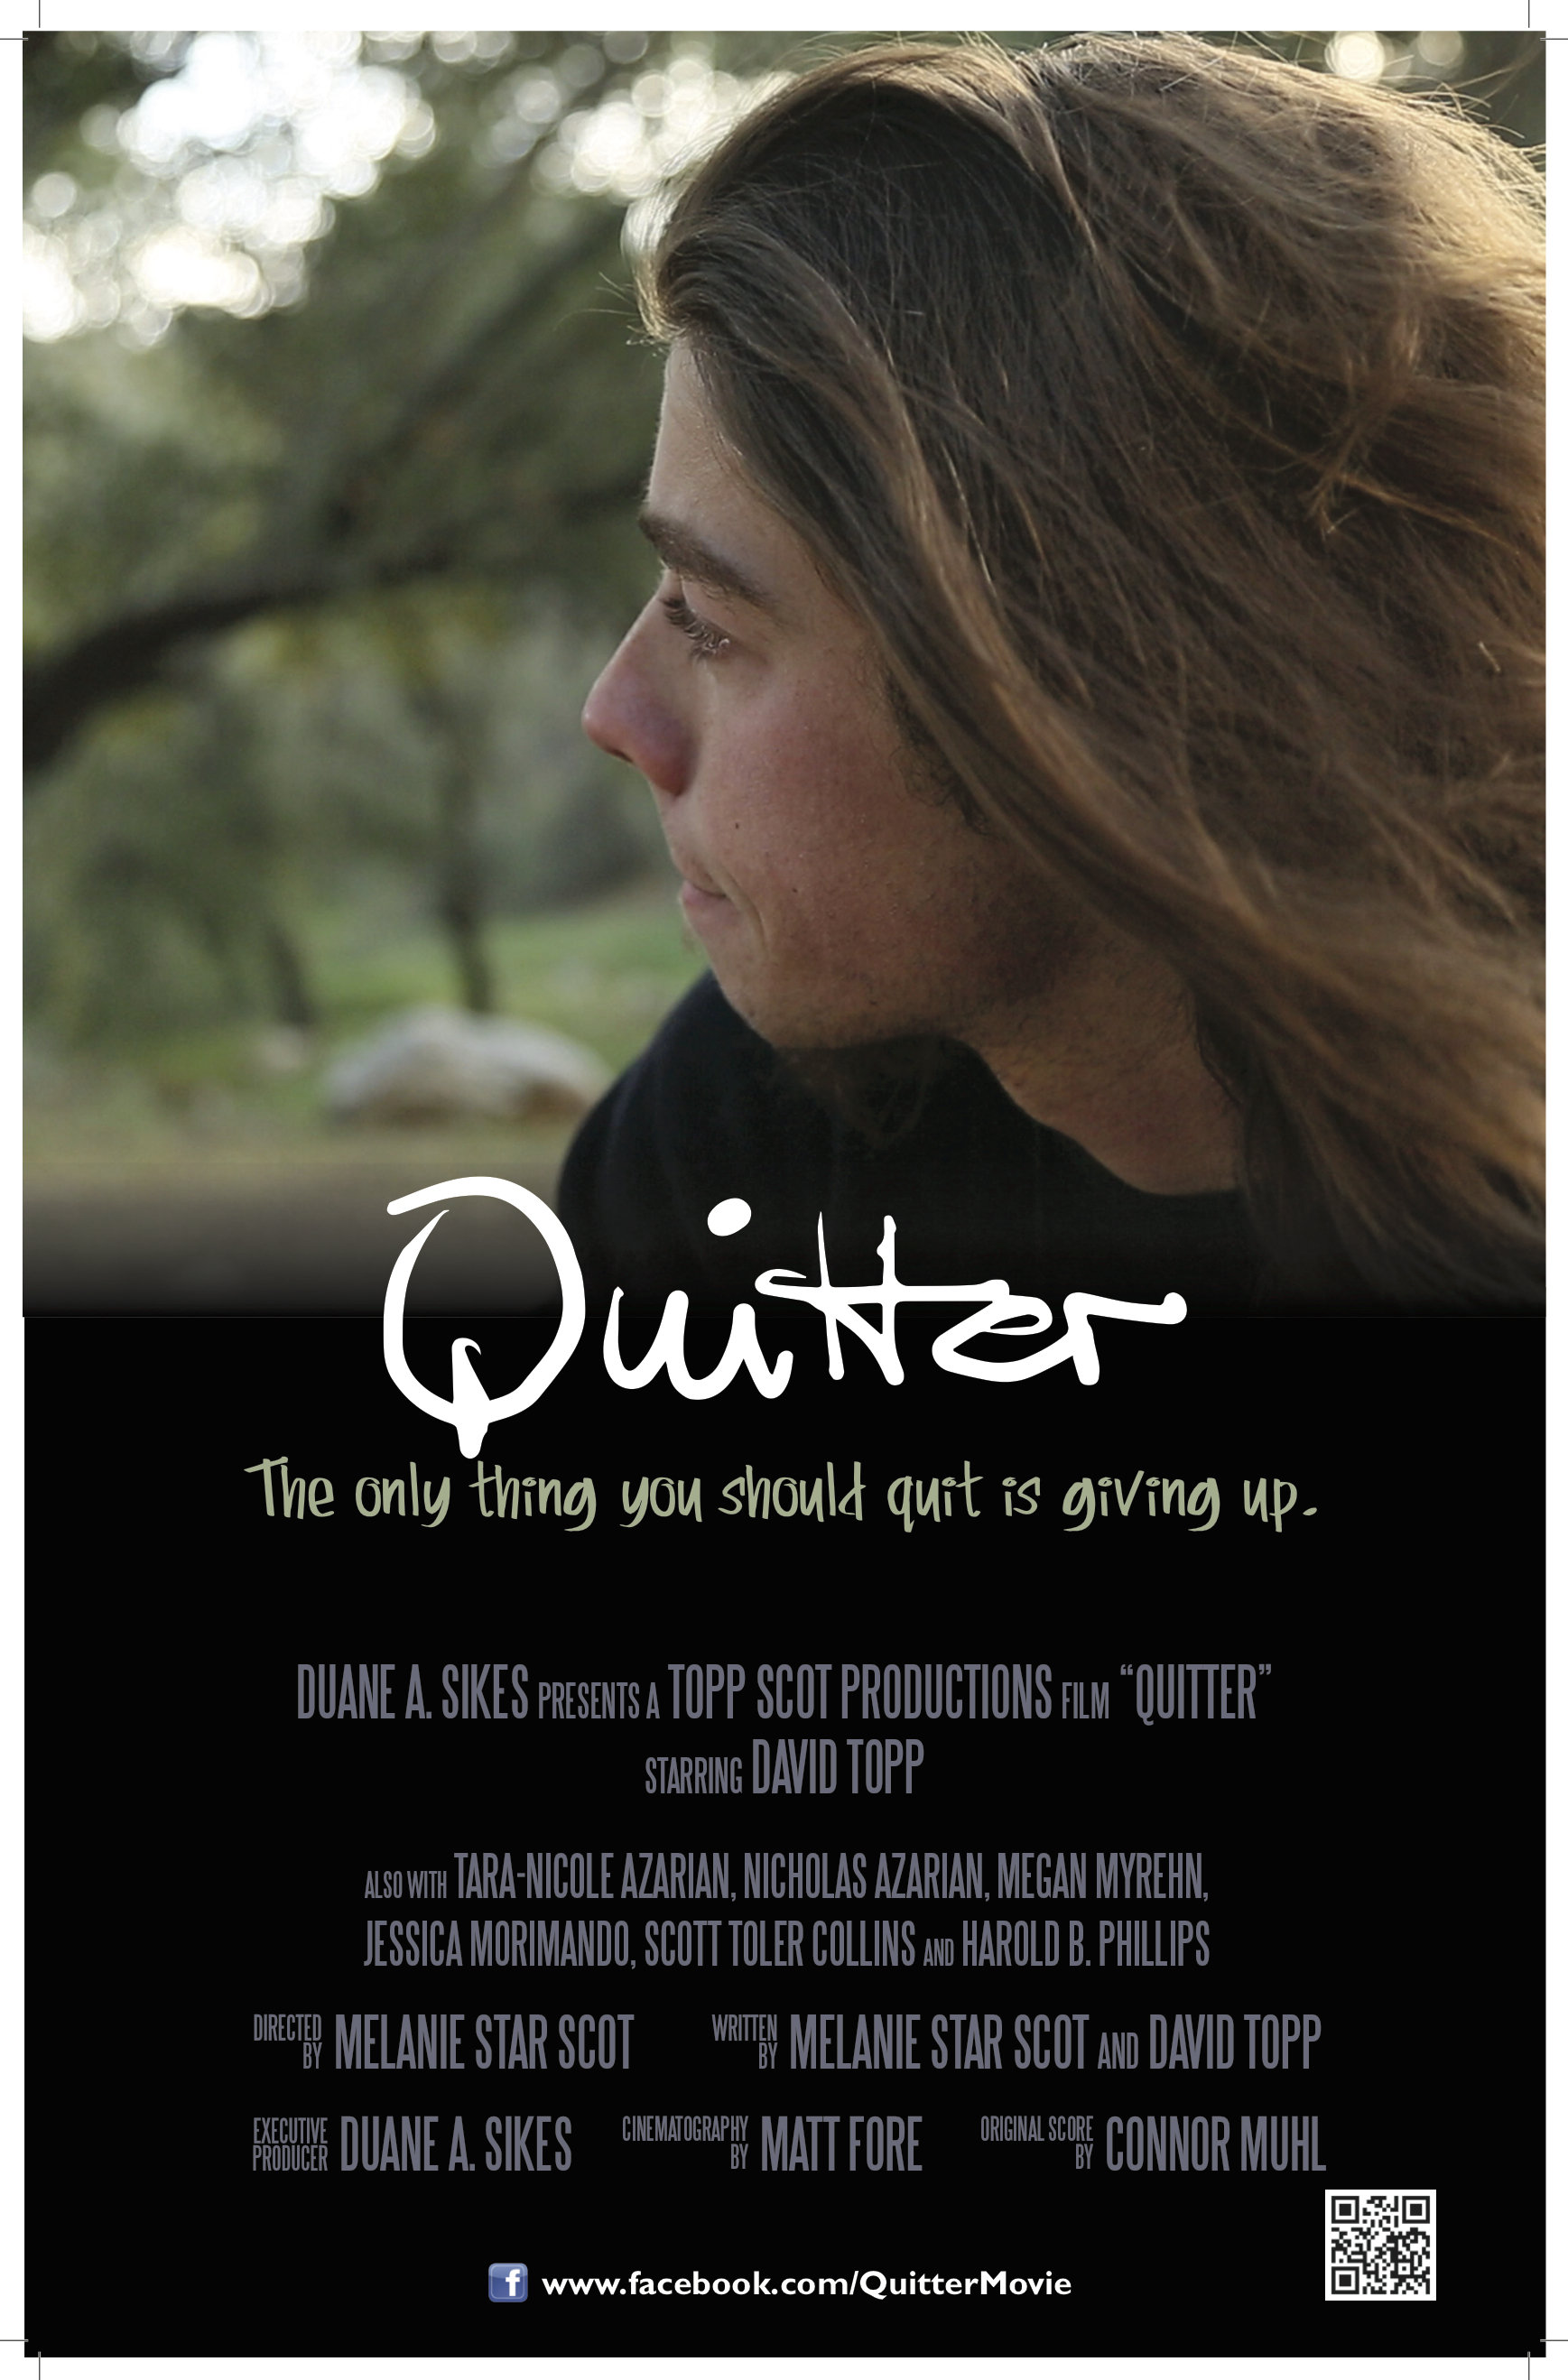 Duane A. Sikes, David Topp and Melanie Star Scot in Quitter (2014)